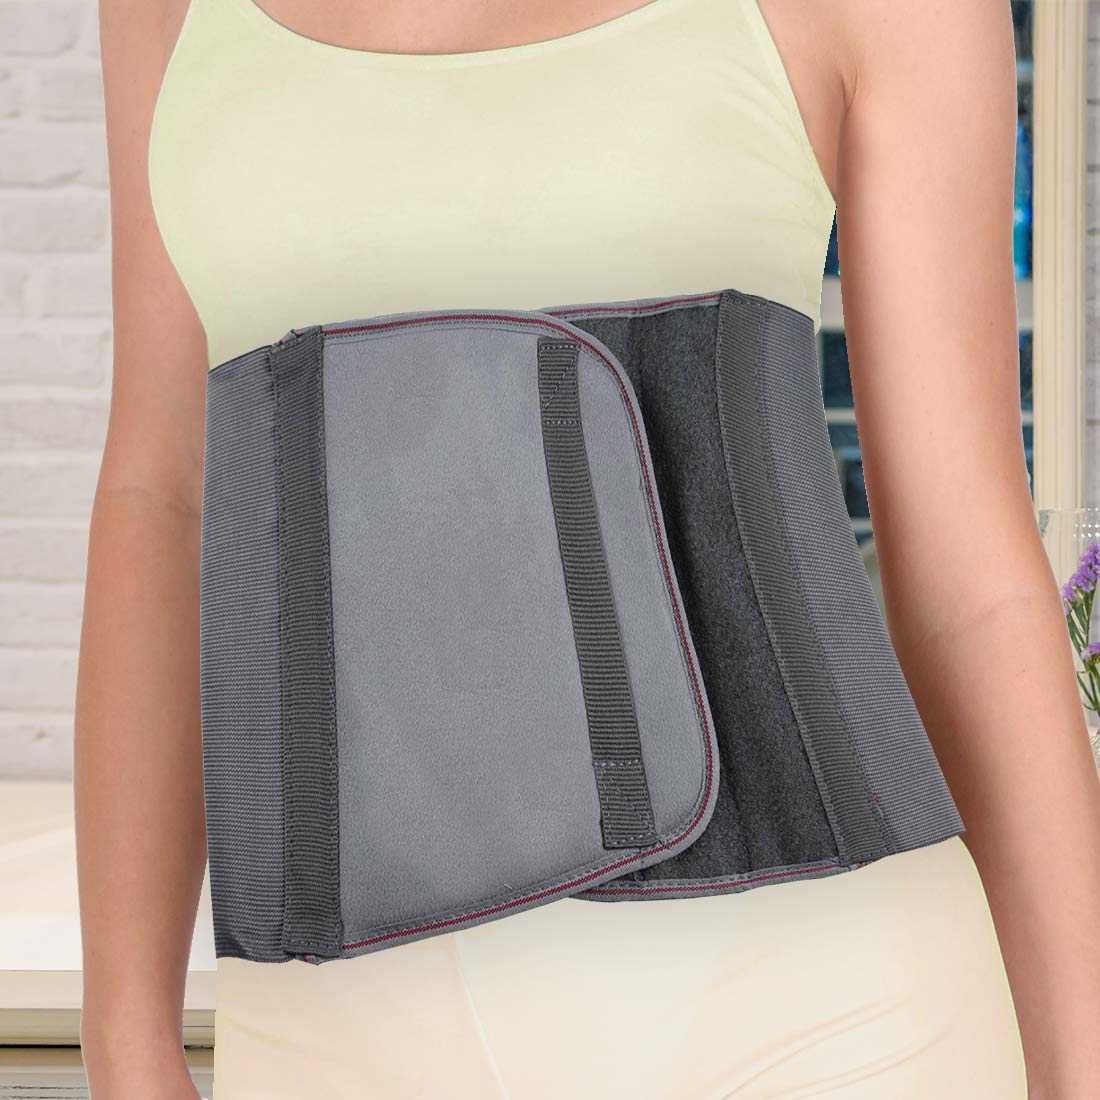 Post Pregnancy Support & Recovery Belt for Compression Support - Grey (M)